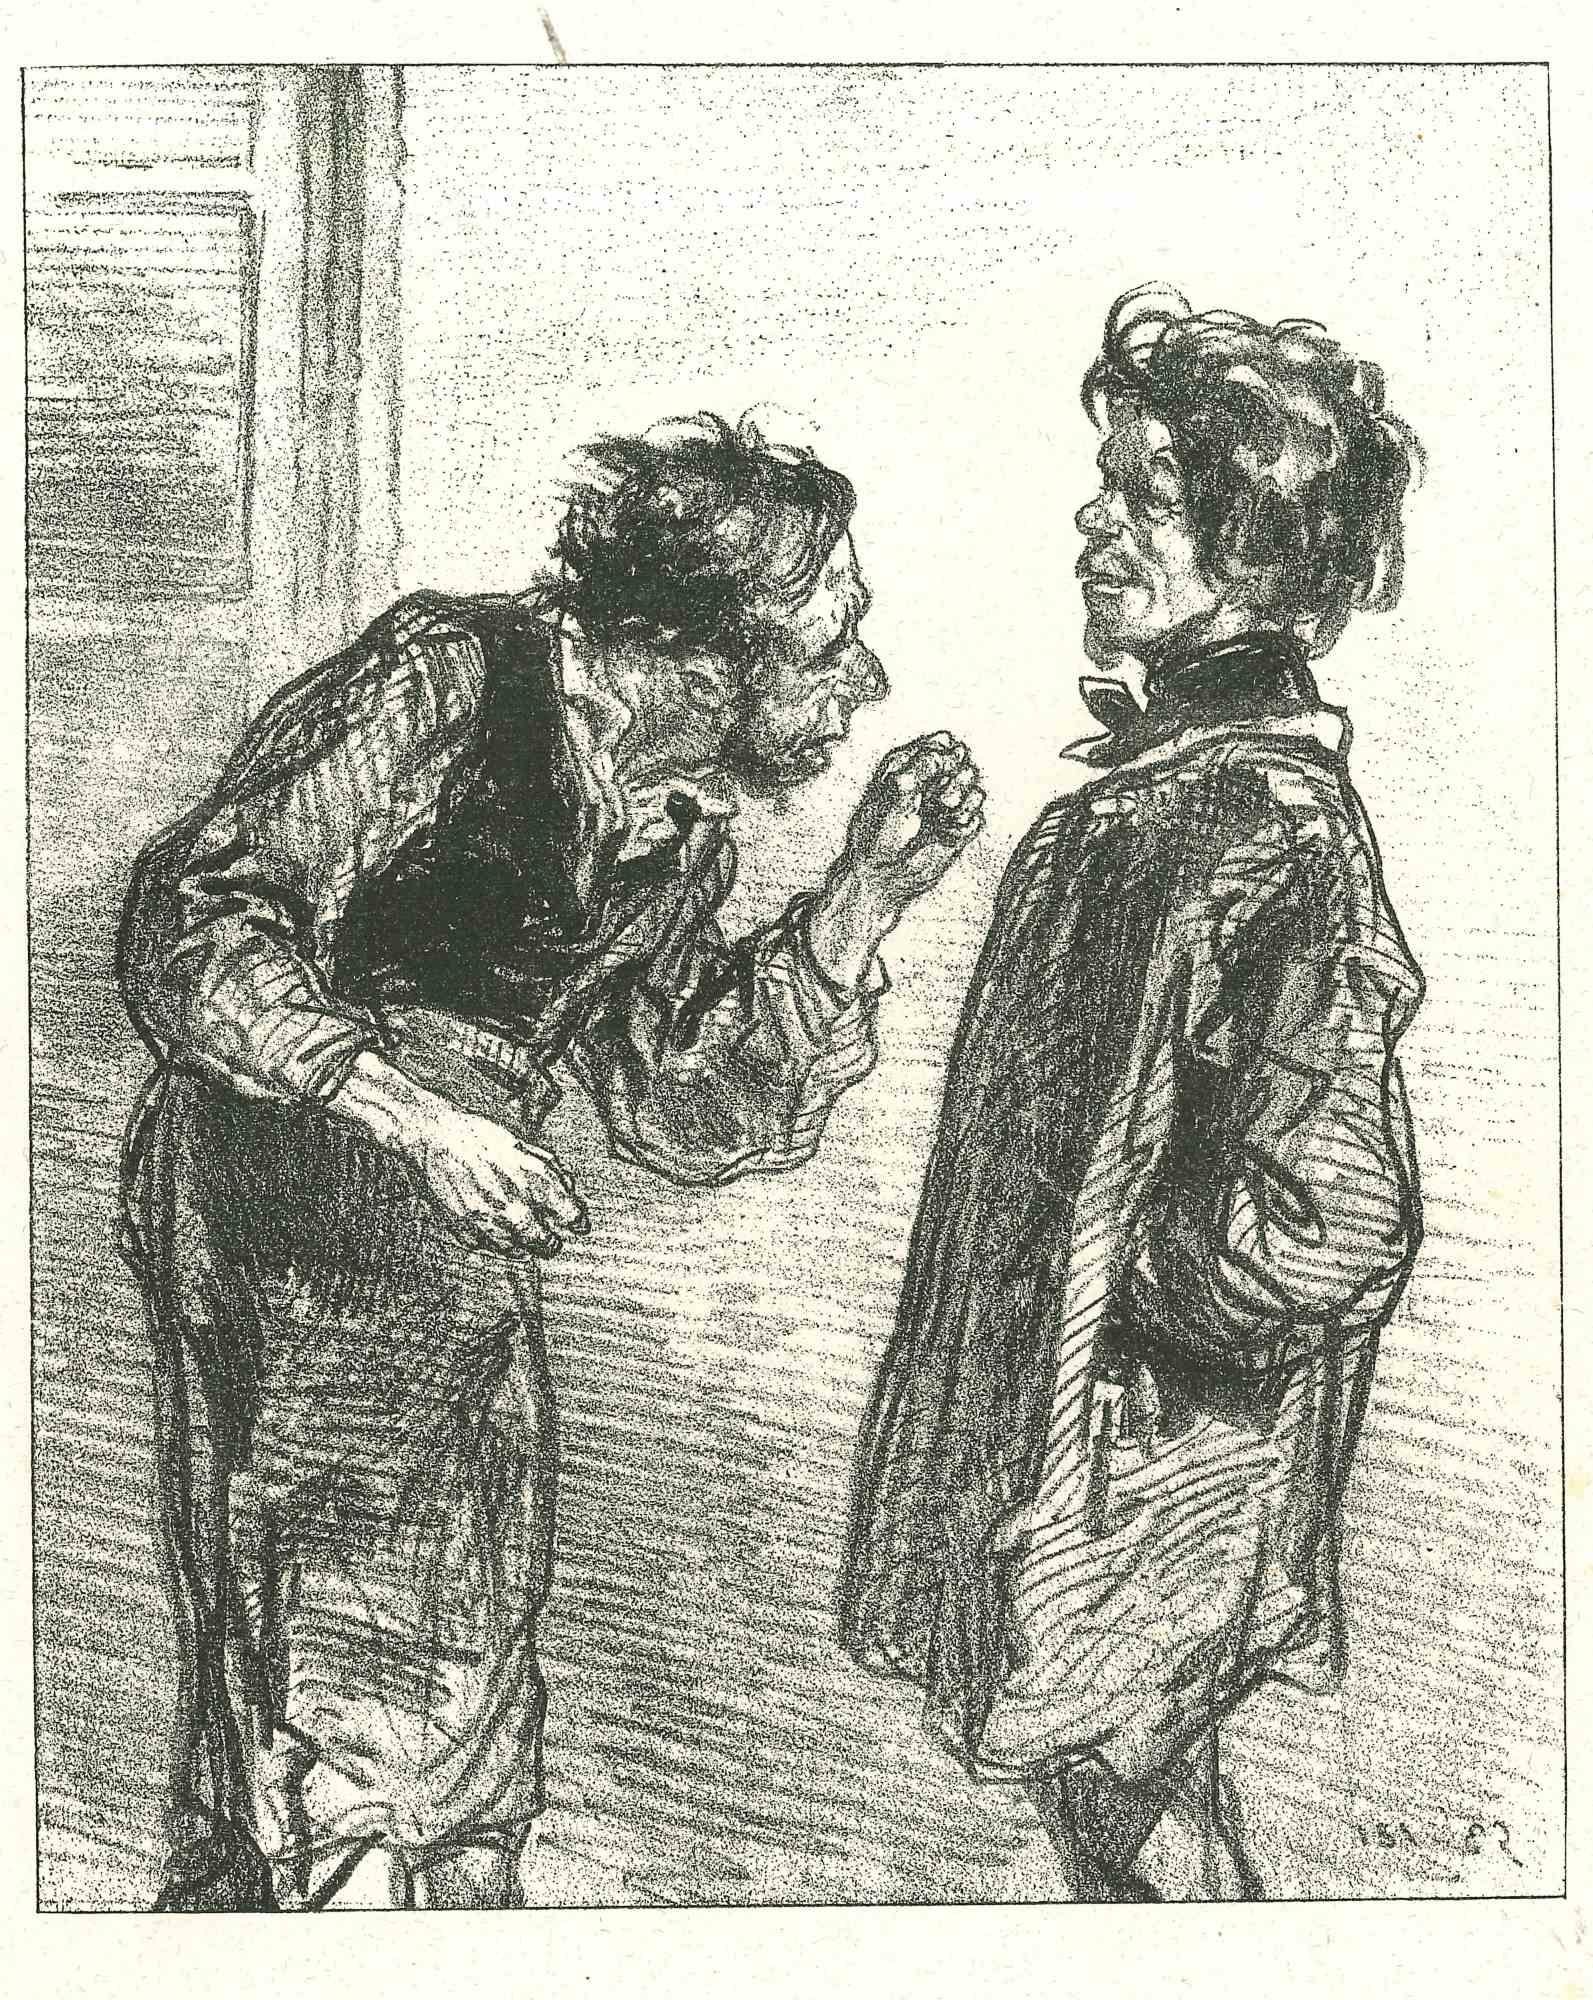 The conversation is an original lithograph on ivory-colored paper, realized by the French draftsman Paul Gavarni (after) (alias Guillaume Sulpice Chevalier Gavarni, 1804-1866) in Paris, 1881, in the collection of Illustrations for "La Mascarade